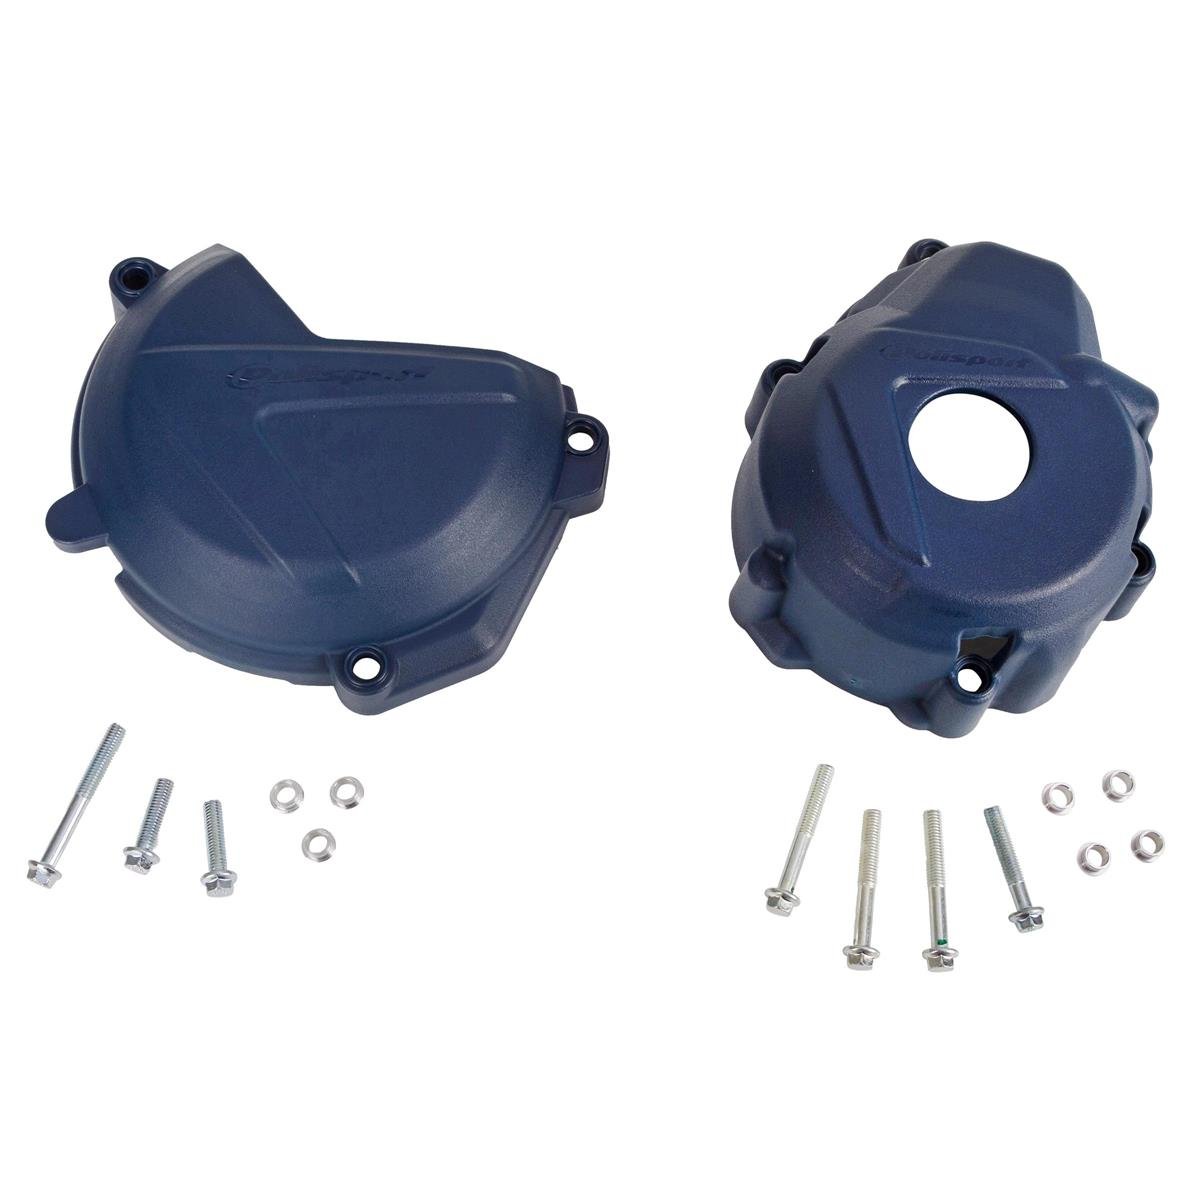 Polisport Clutch/Ignition Cover Protection  Husqvarna FE 250/350 '18, Blue